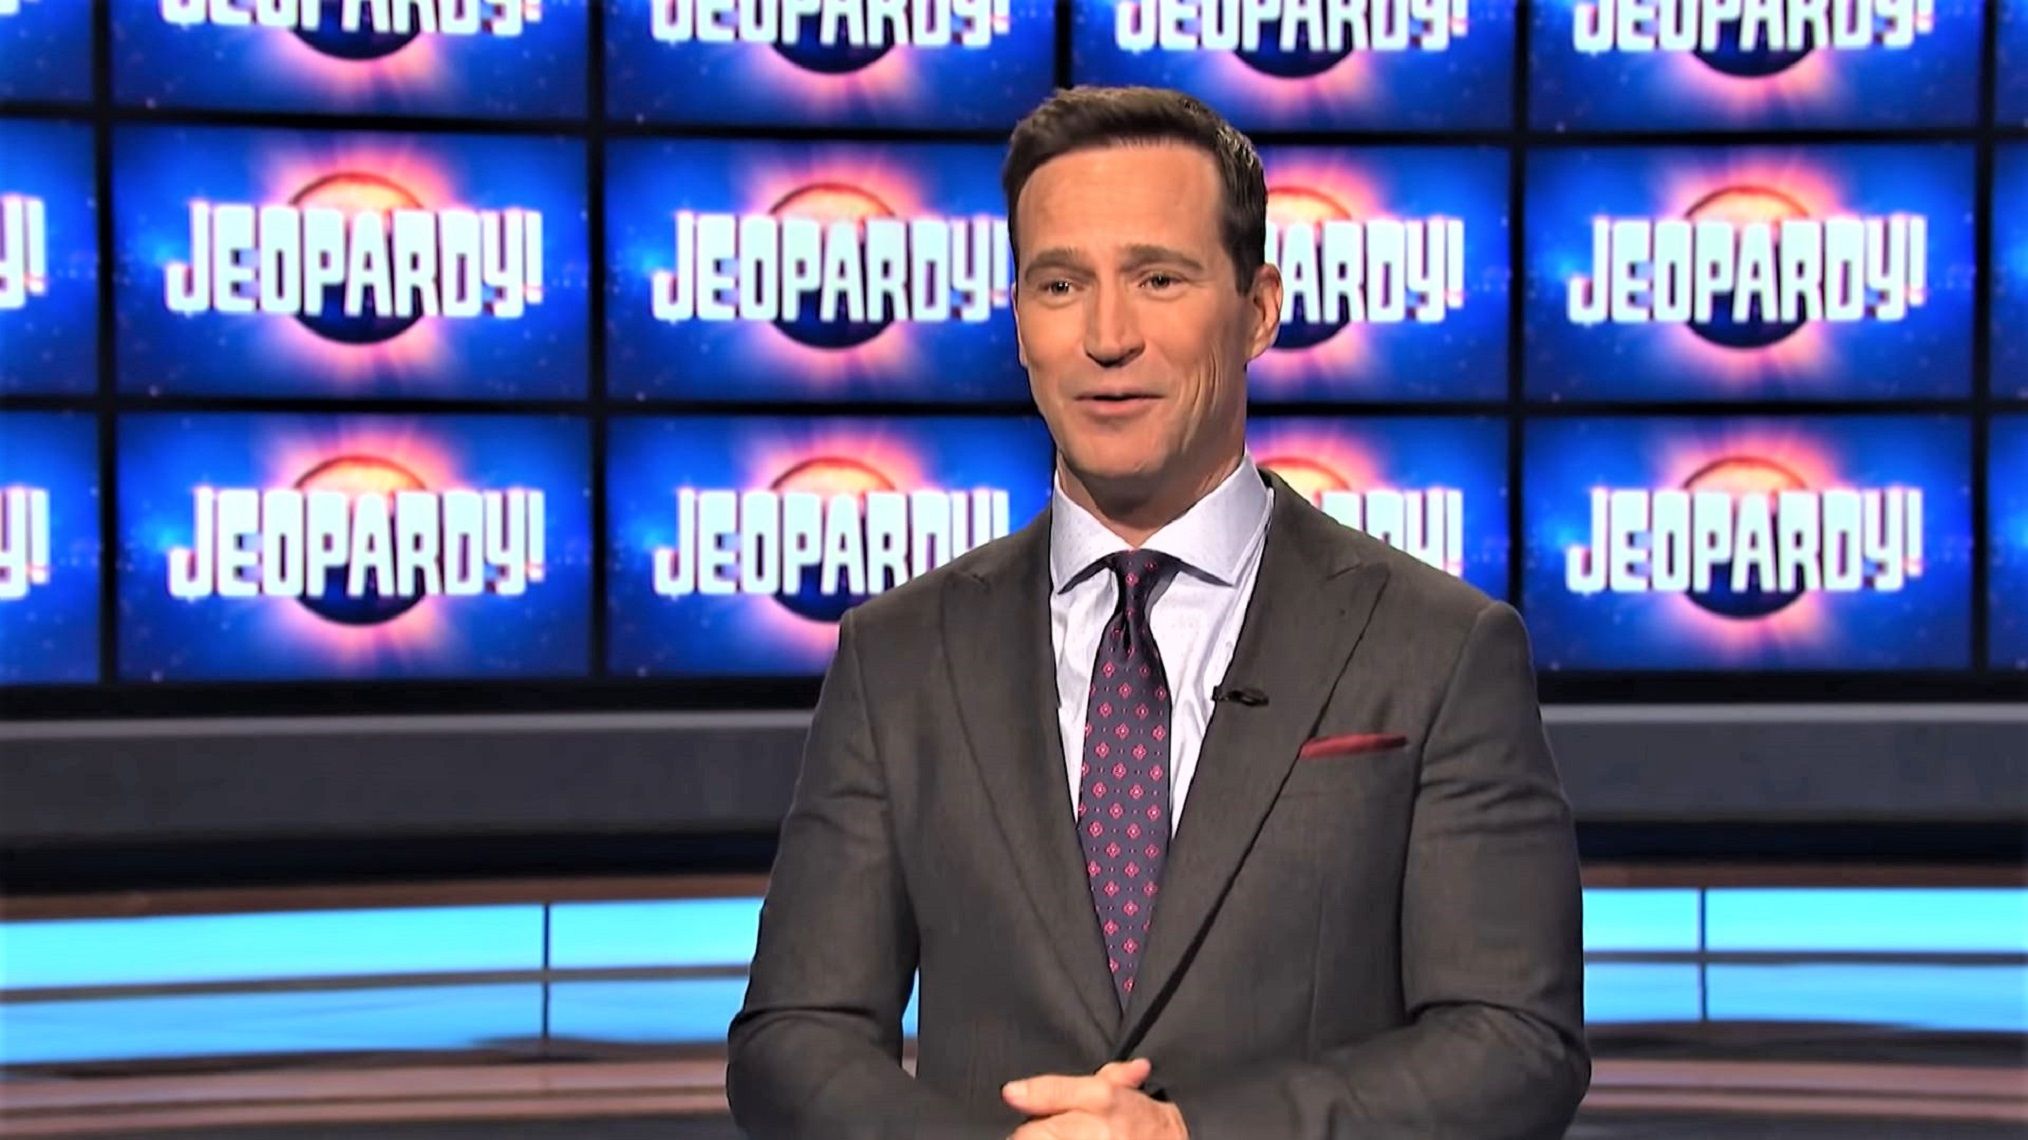 Jeopardy!' producer Mike Richards named host, Mayim Bialik given